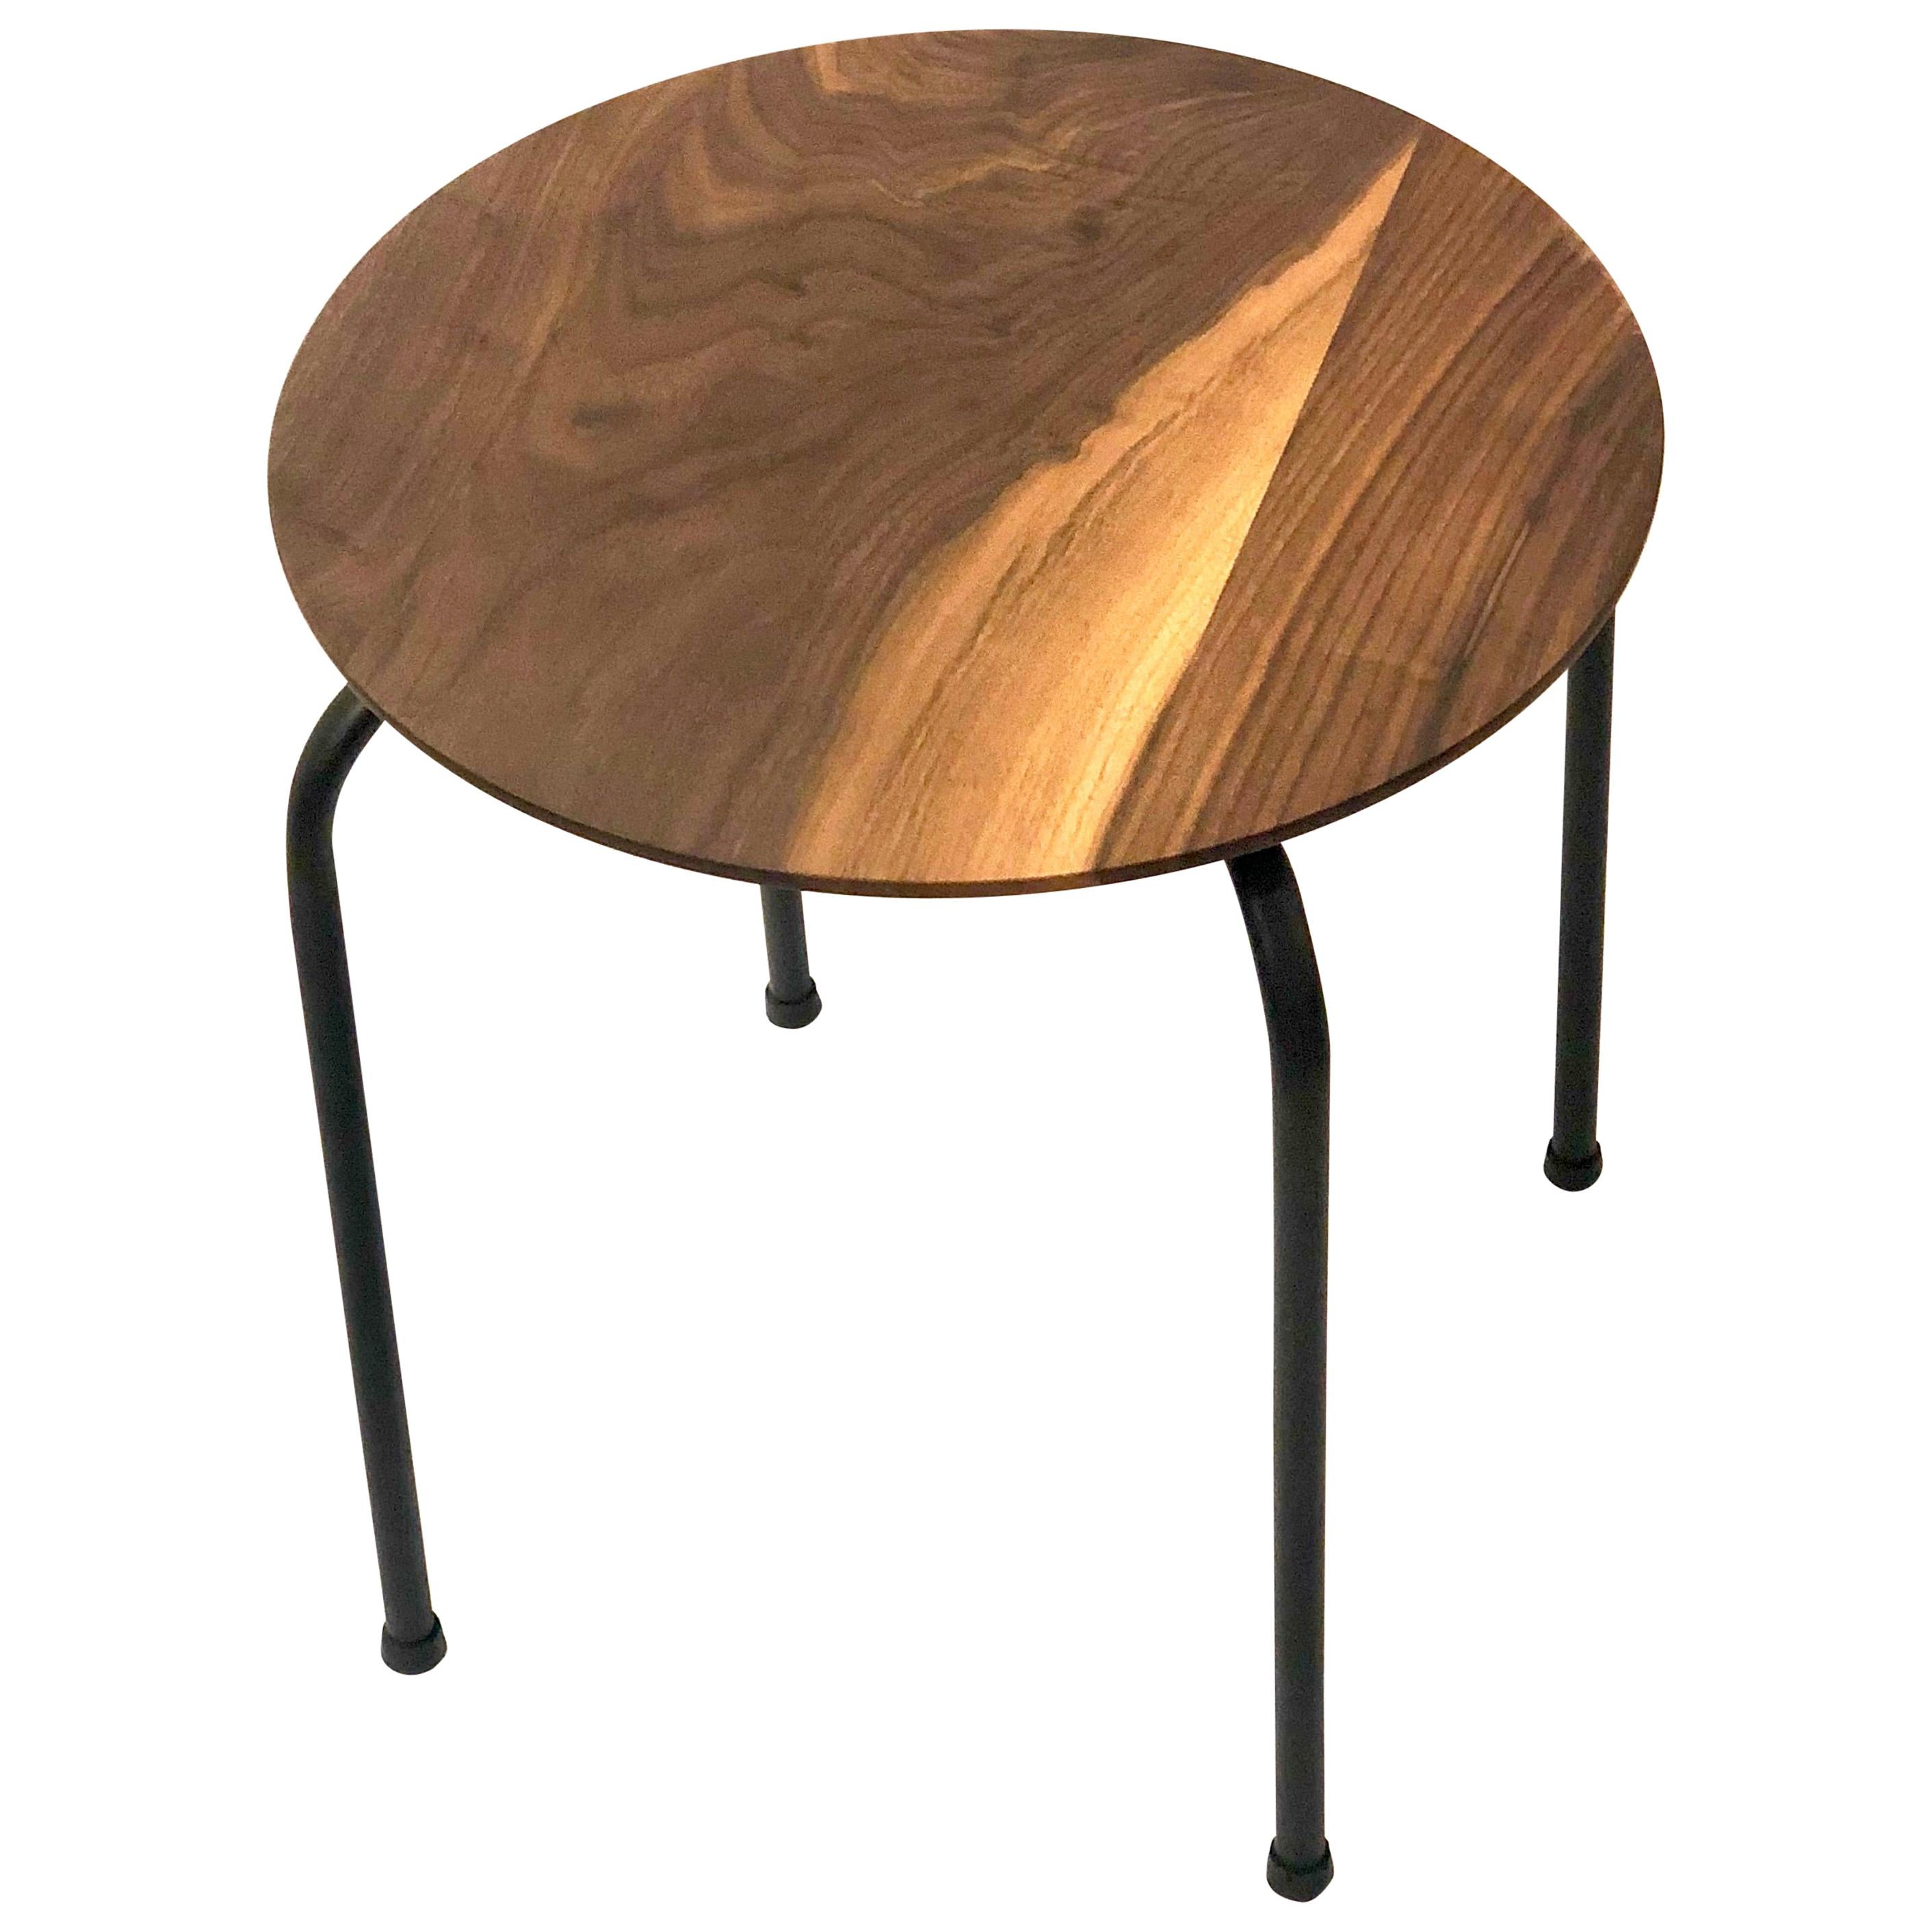 American Black Walnut Cocktail Table or Stool with Black Metal Base